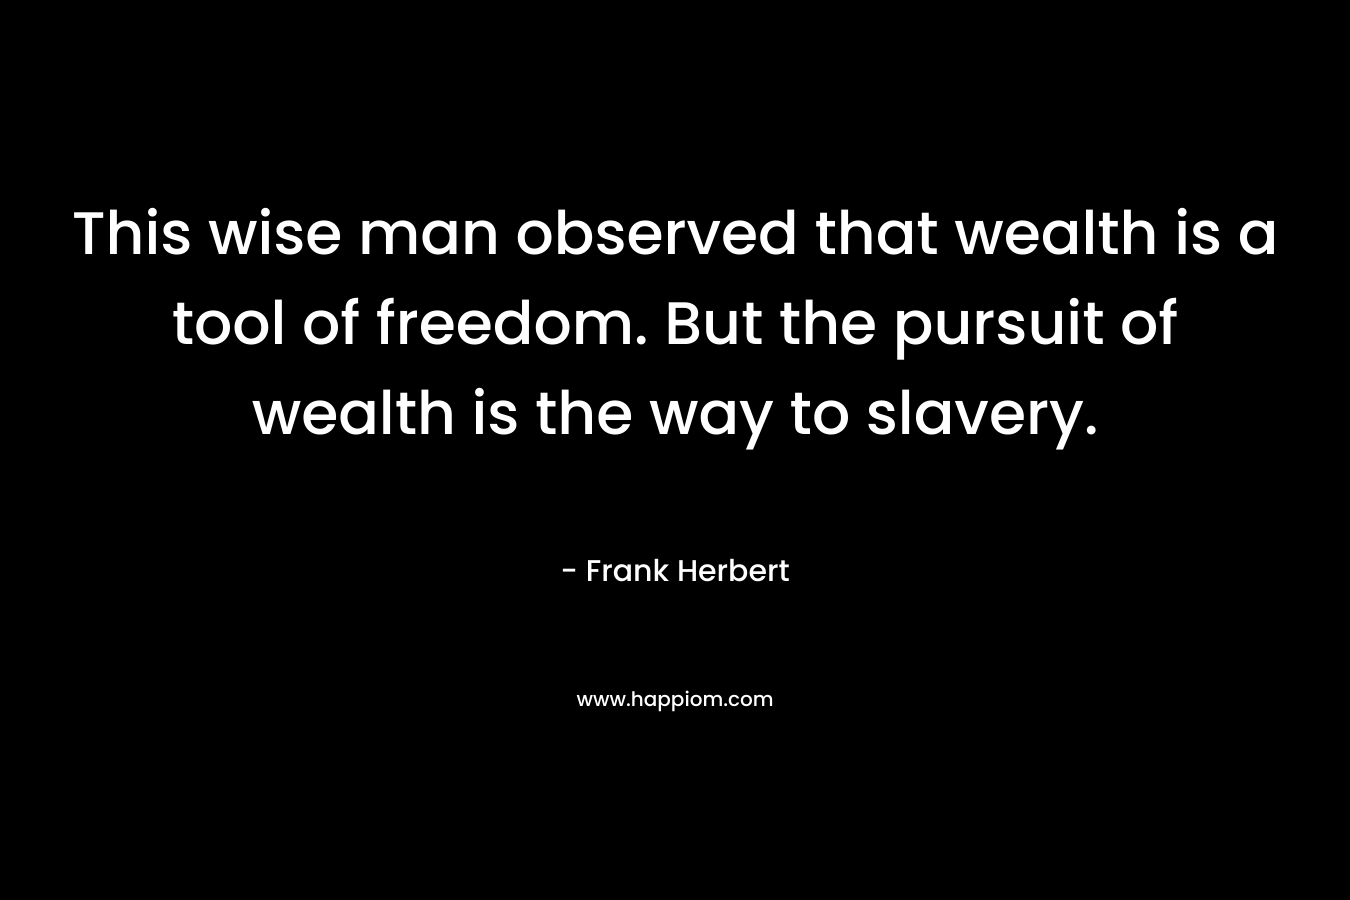 This wise man observed that wealth is a tool of freedom. But the pursuit of wealth is the way to slavery.